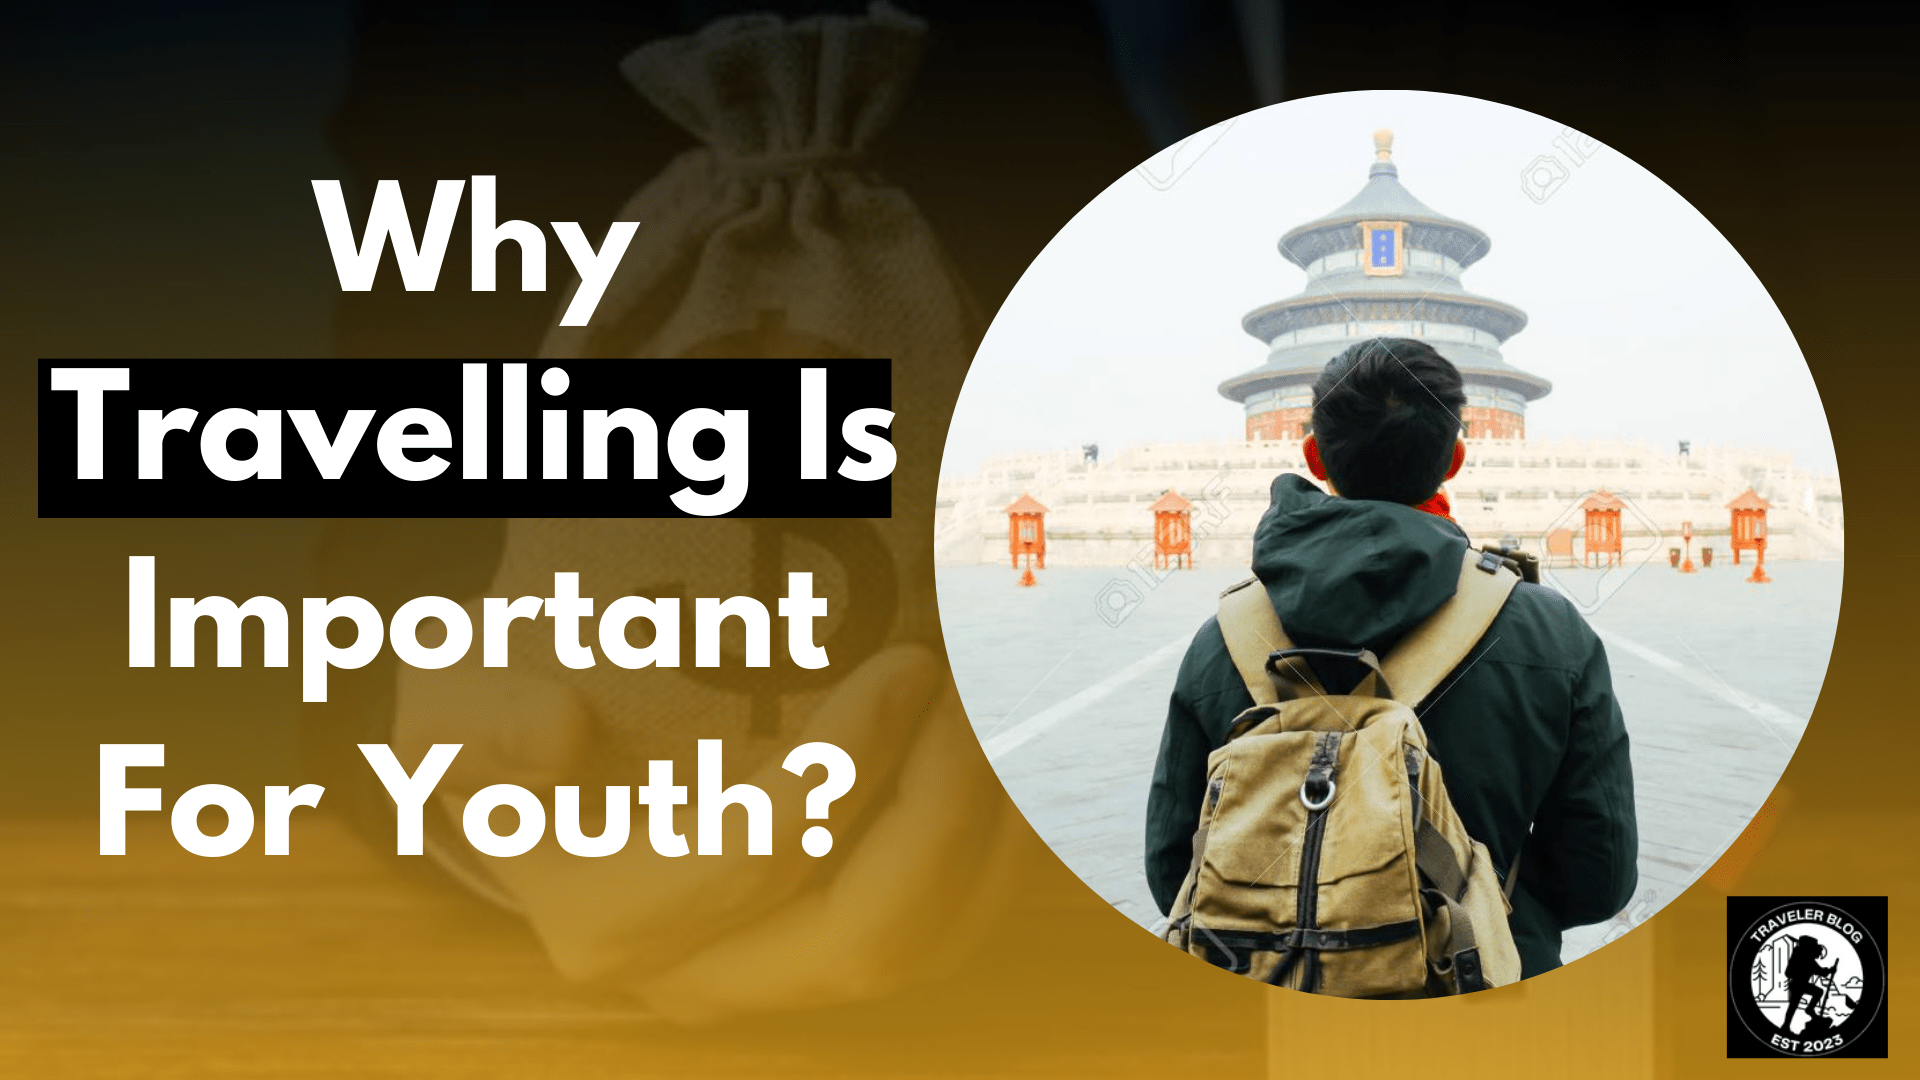 Why Travelling Is Important For Youth